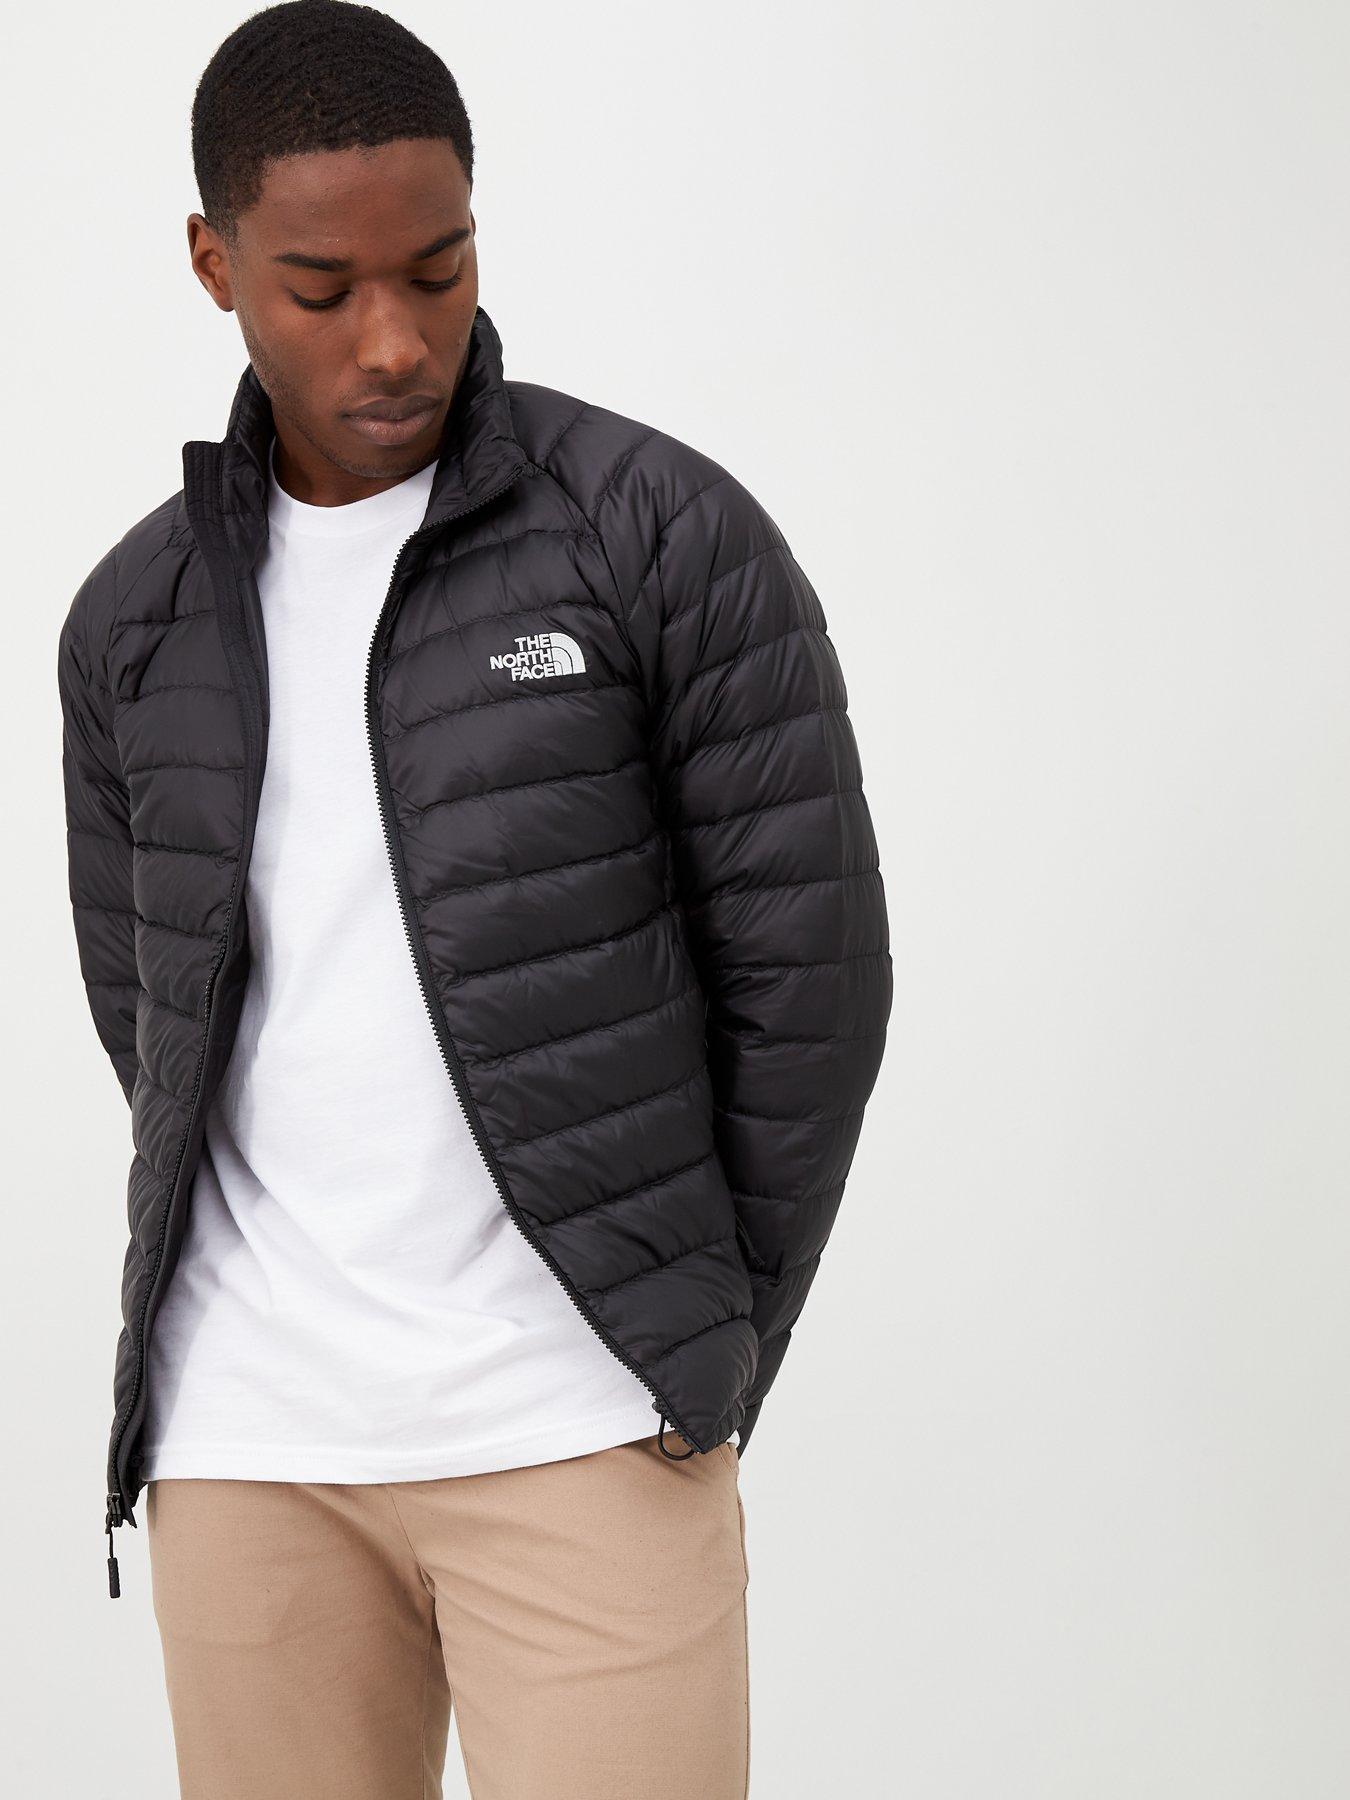 the north face jacket trevail Online 